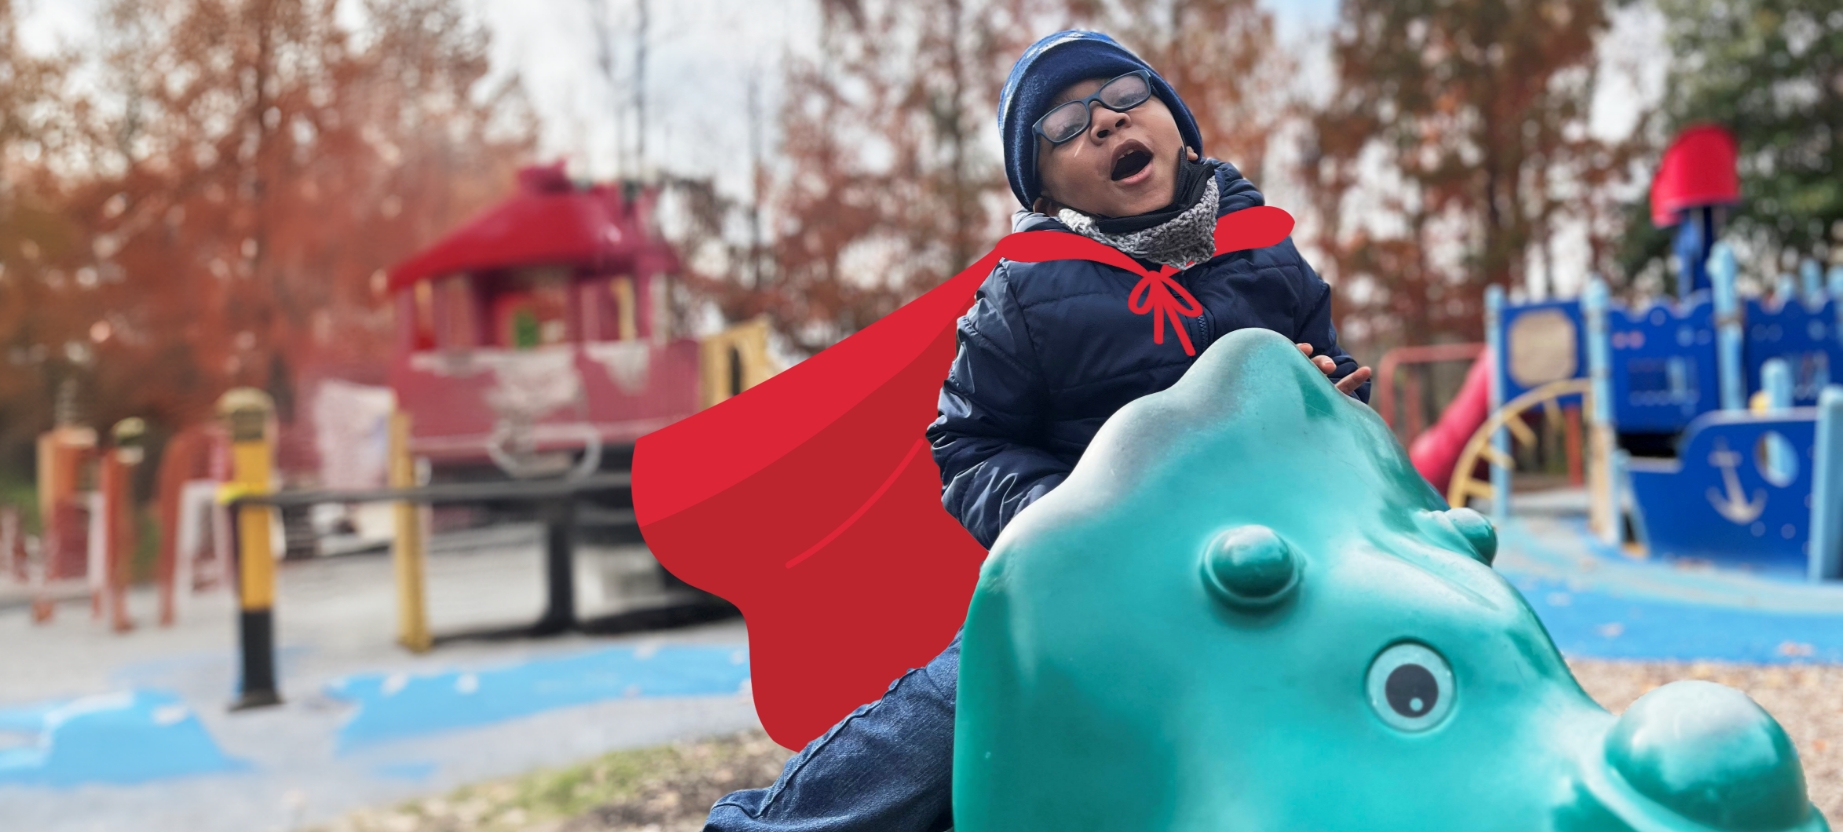 Young boy on a playground wearing a cape.